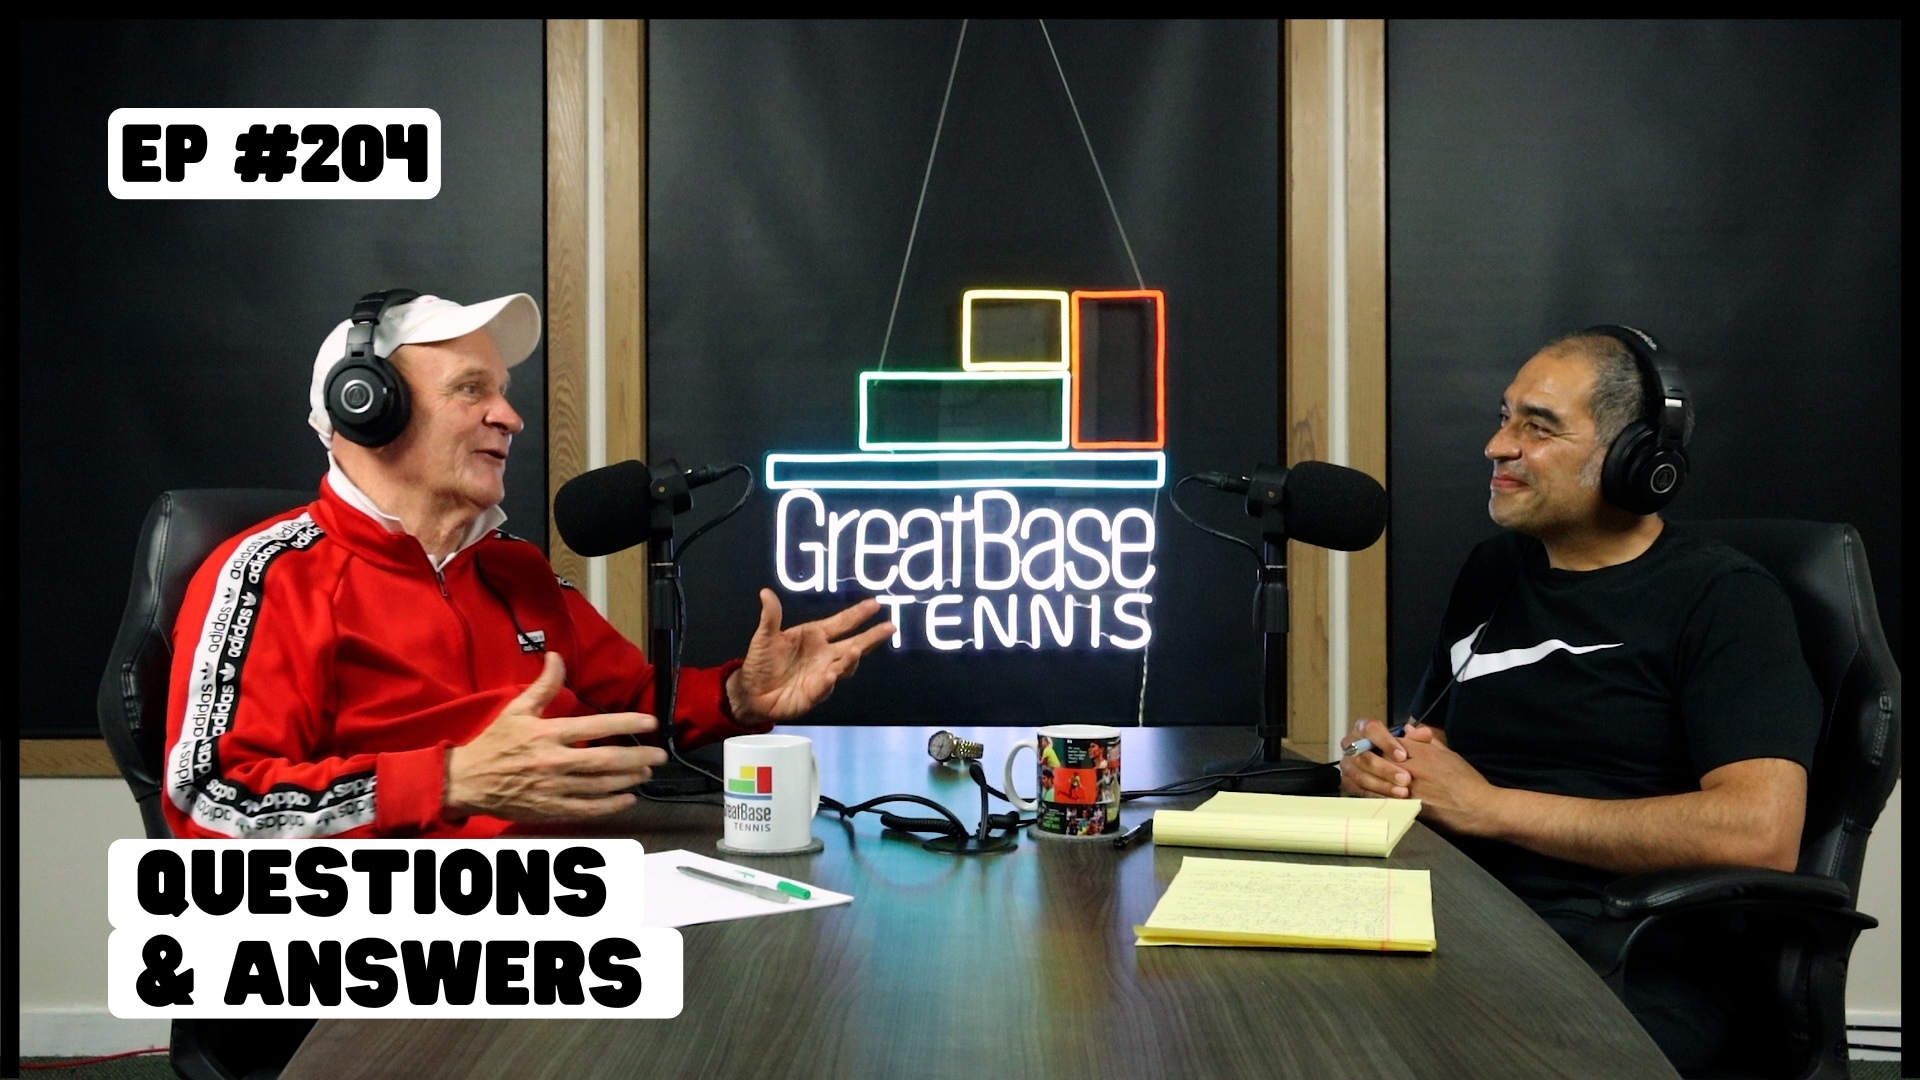 The GreatBase Tennis Podcast Episode 204 - Questions & Answers